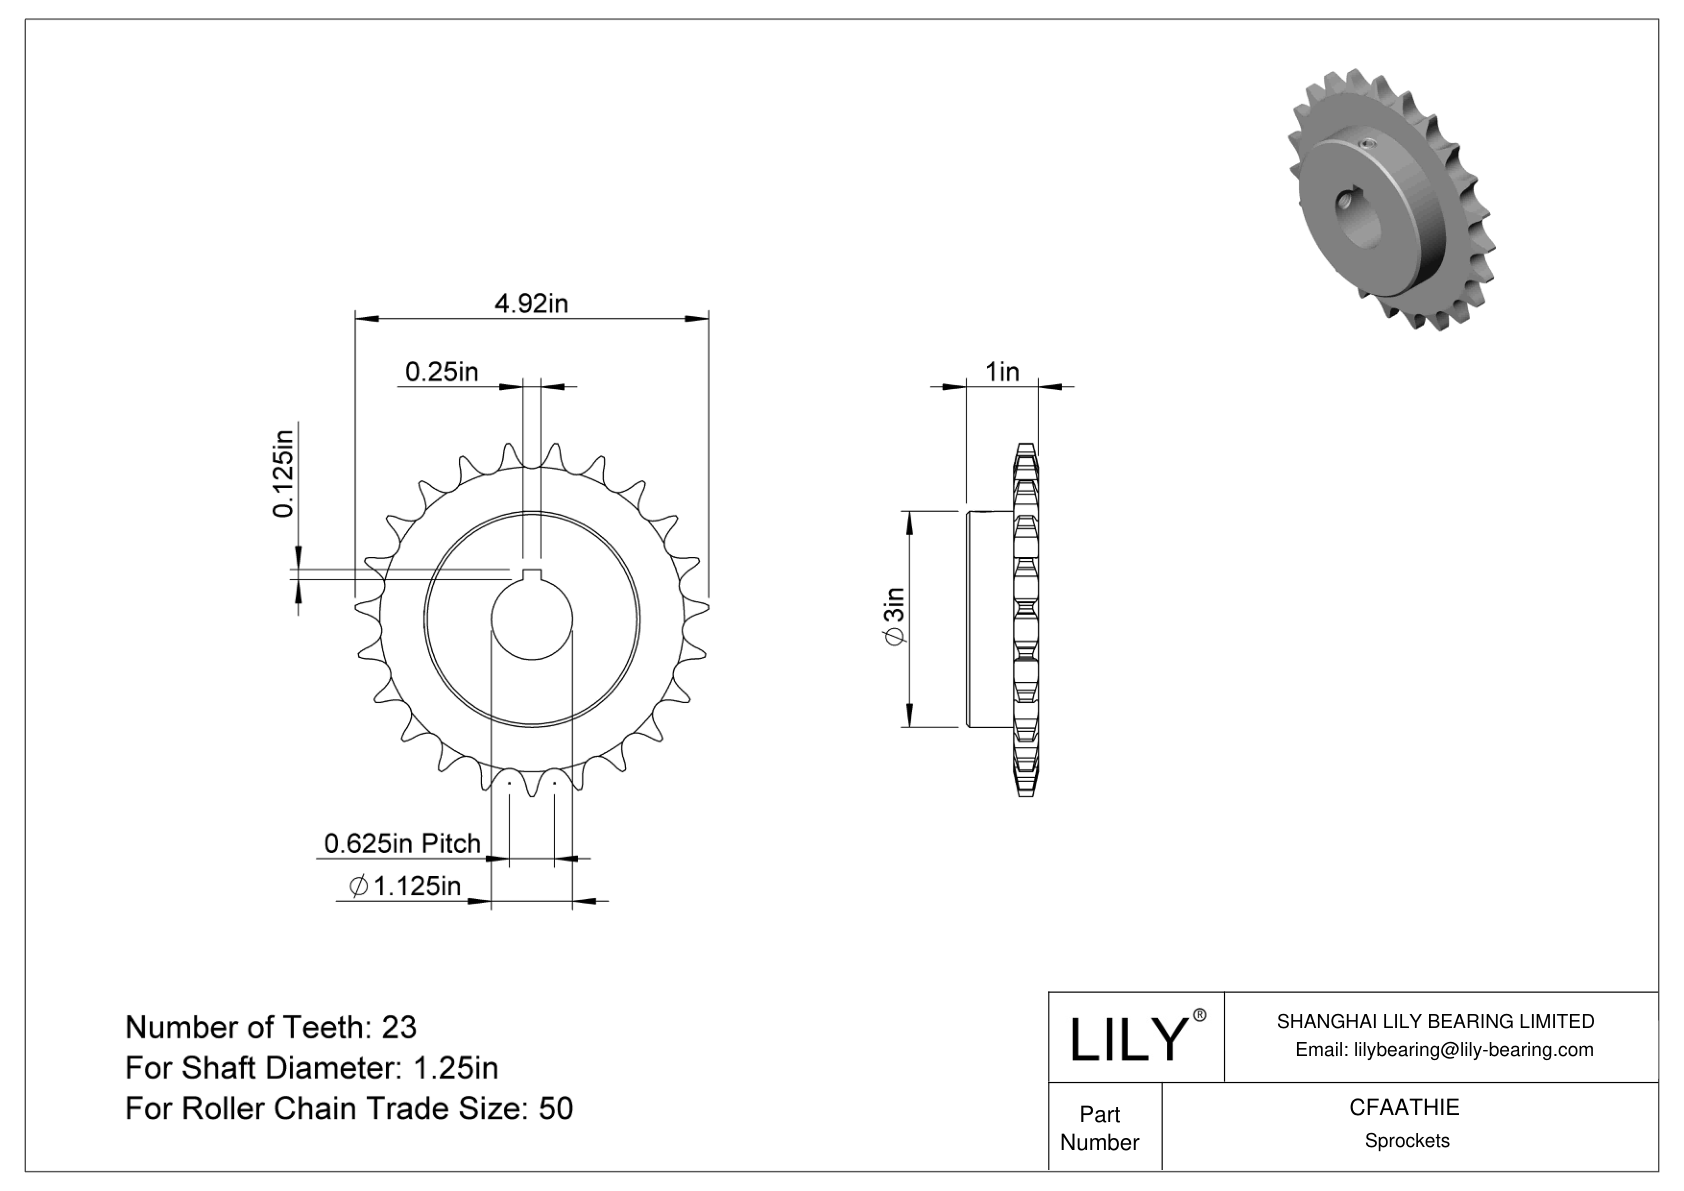 CFAATHIE Wear-Resistant Sprockets for ANSI Roller Chain cad drawing